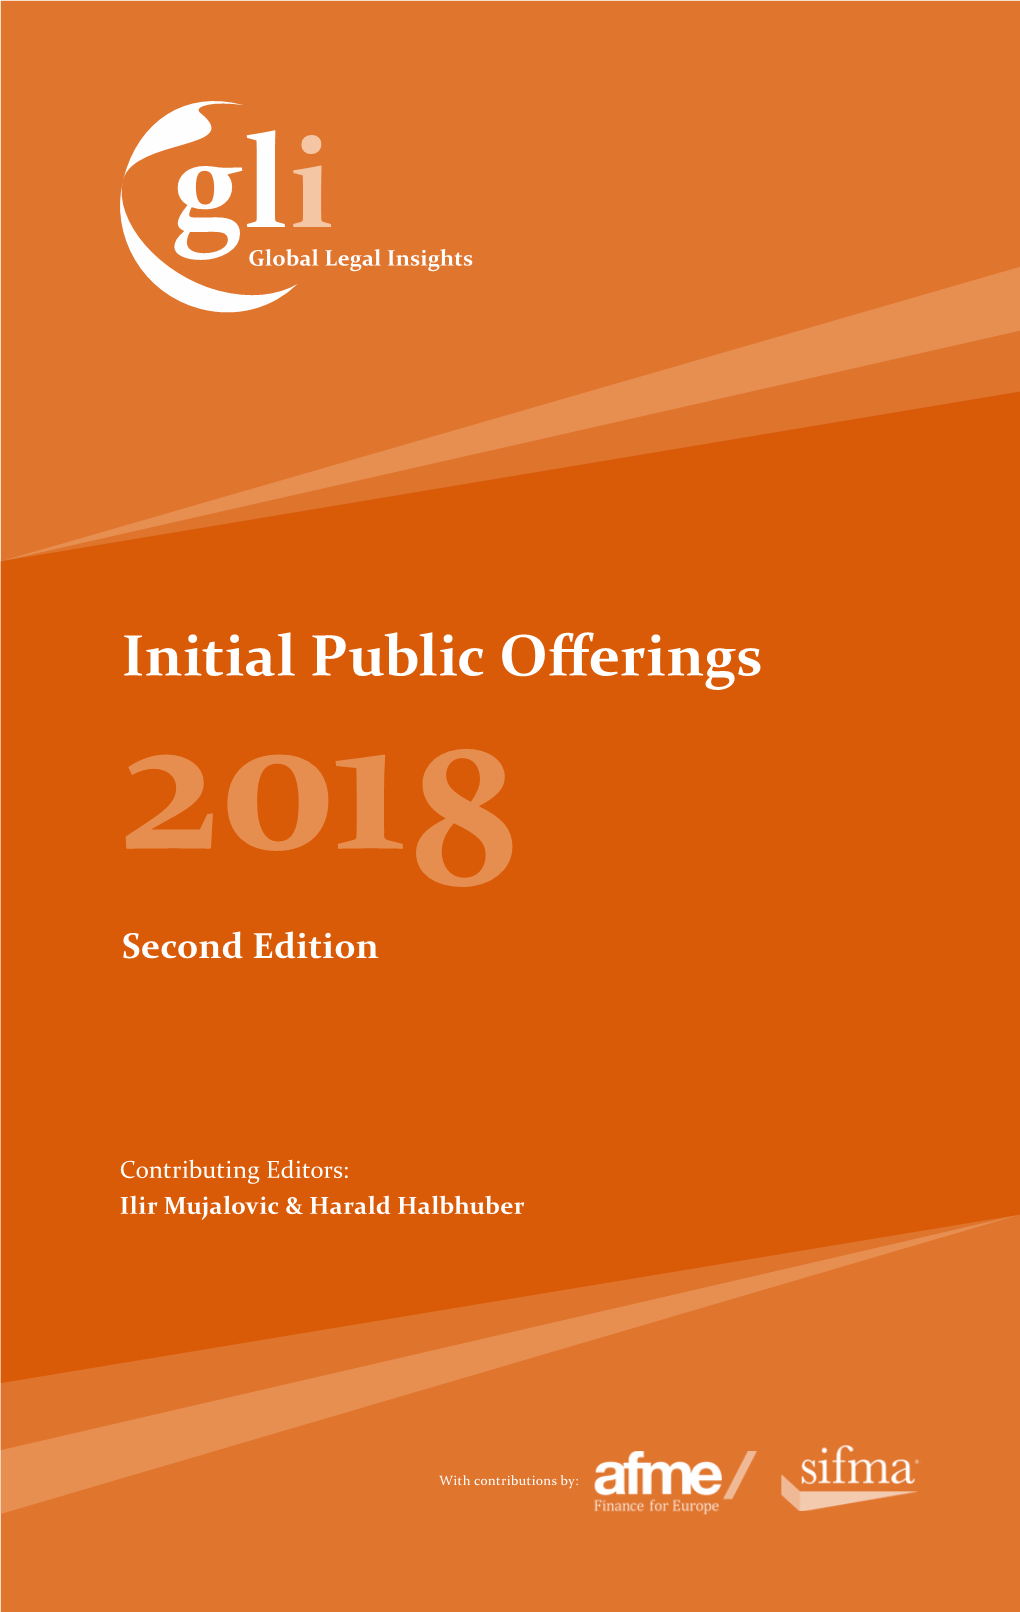 Initial Public Offerings 2018 Second Edition